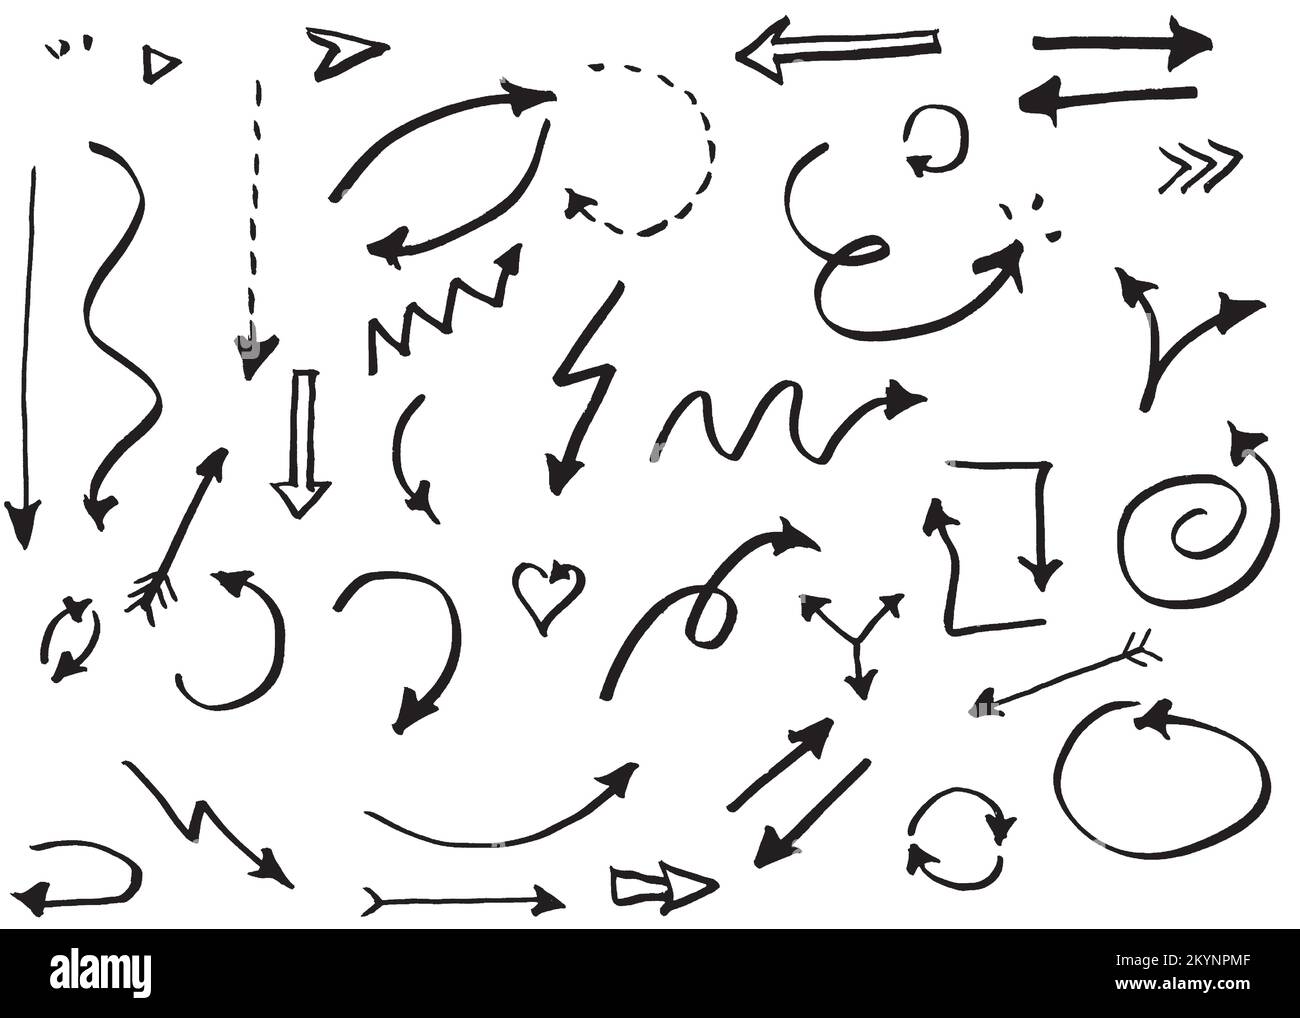 Arrows set freehand drawn Stock Vector